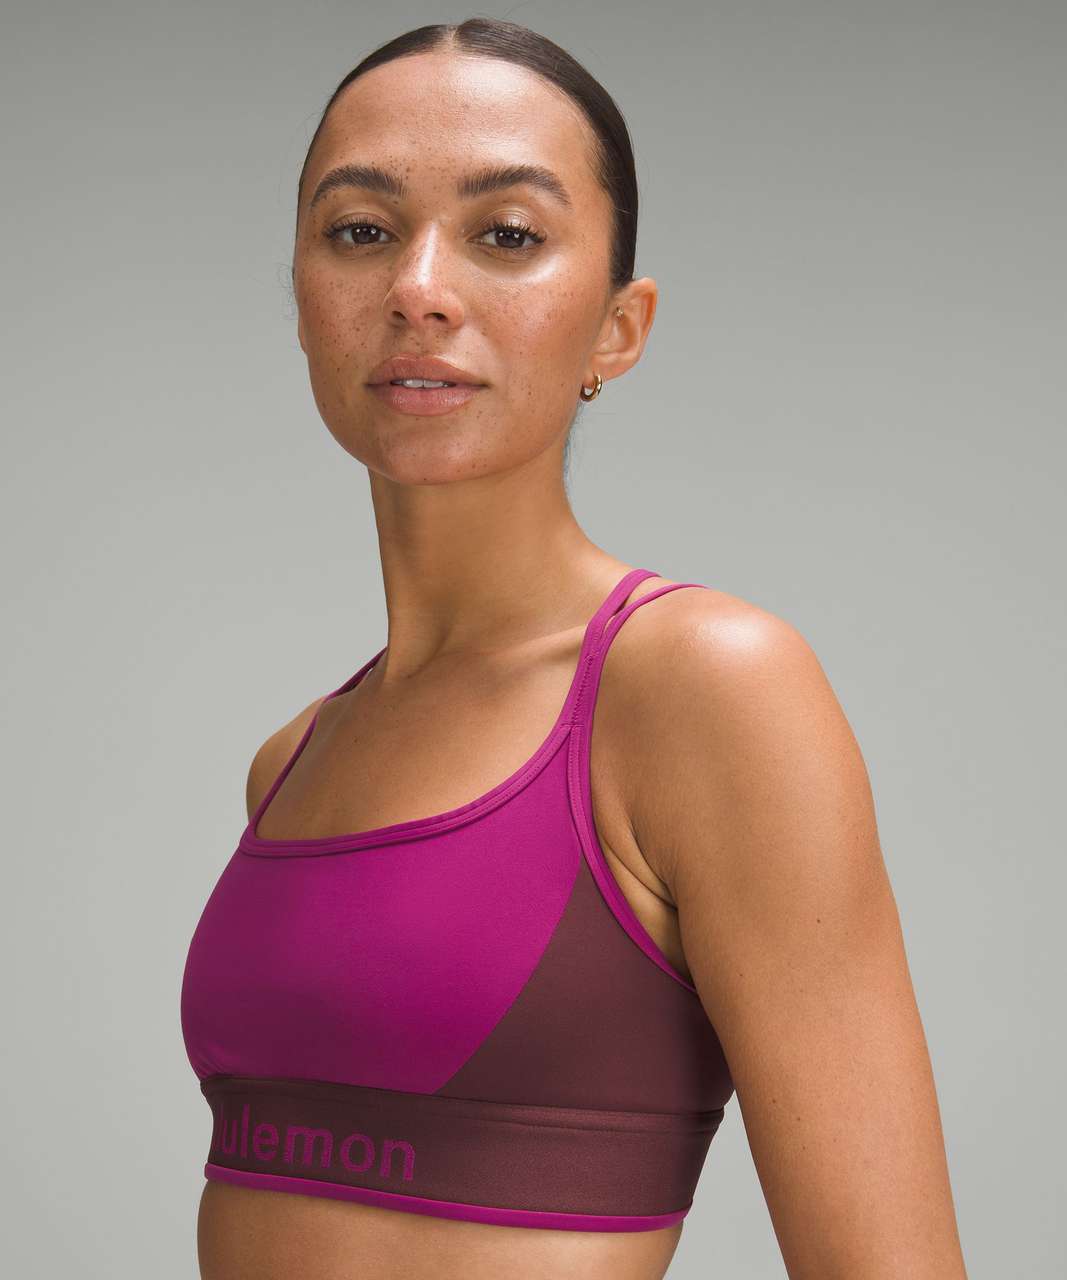 Lululemon Red Sports Bra Specialty Style Size M - $50 (44% Off Retail) -  From Marissa